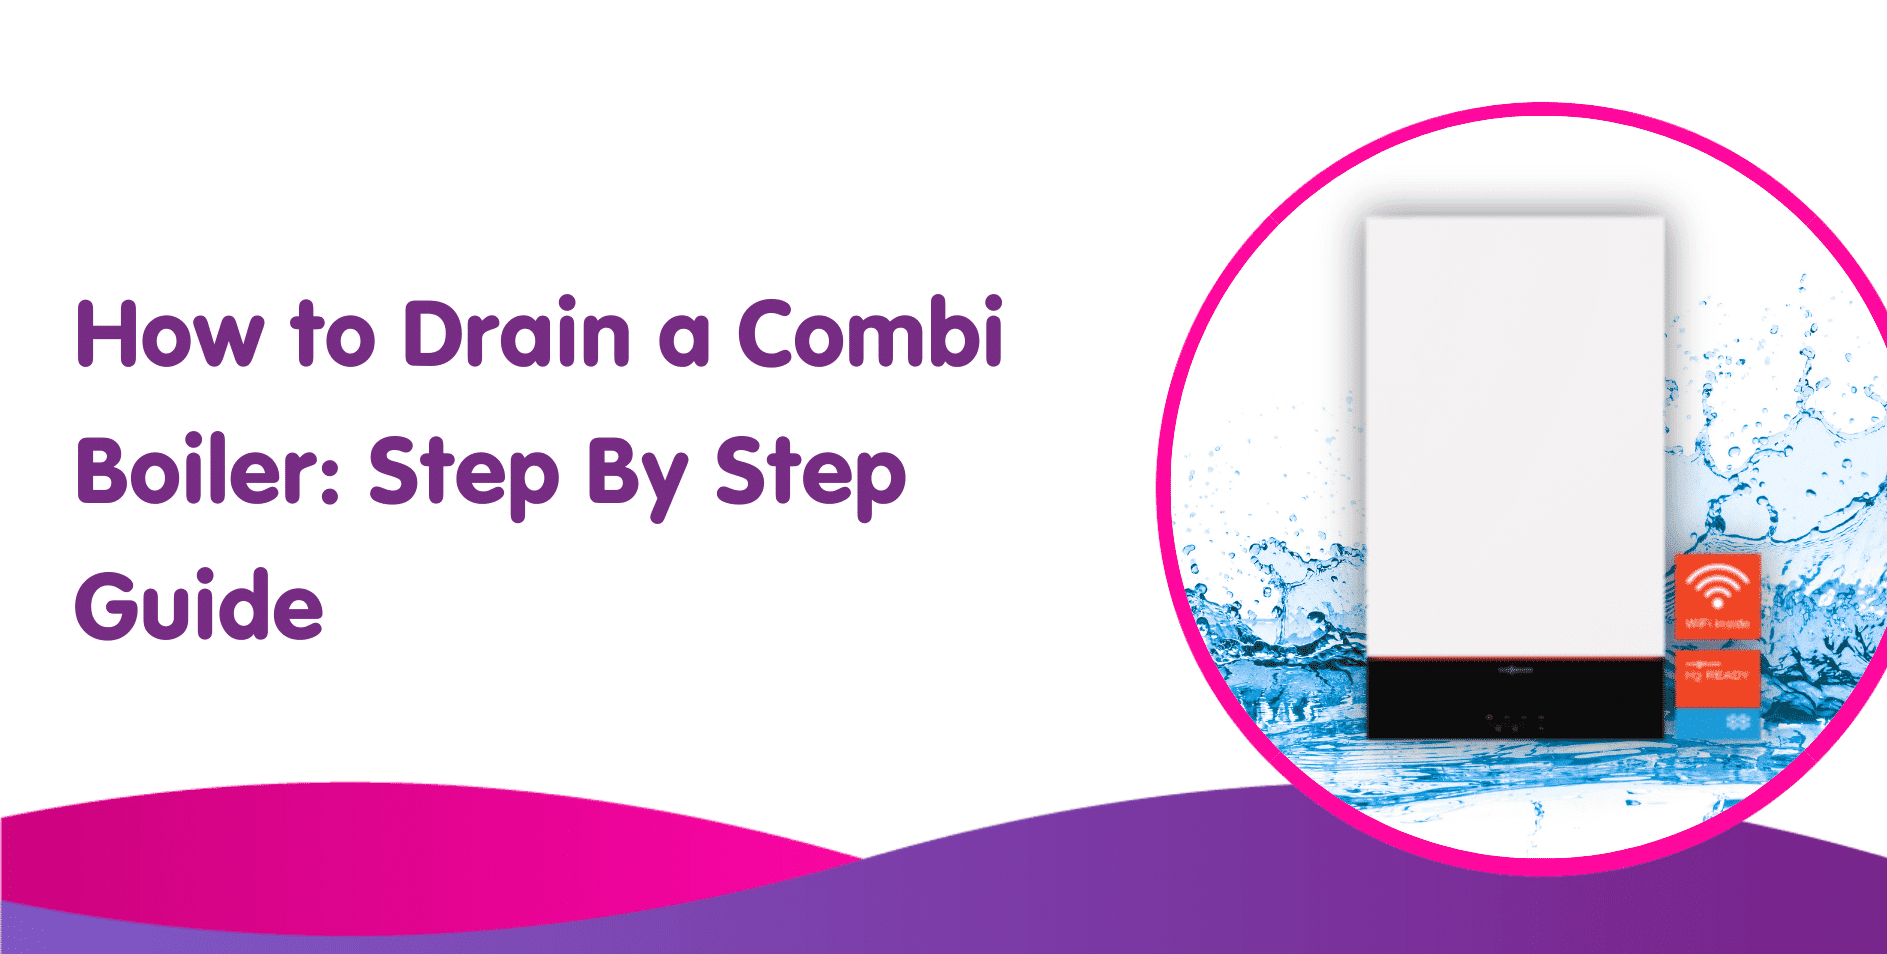 How to Drain a Combi Boiler? Step By Step Guide